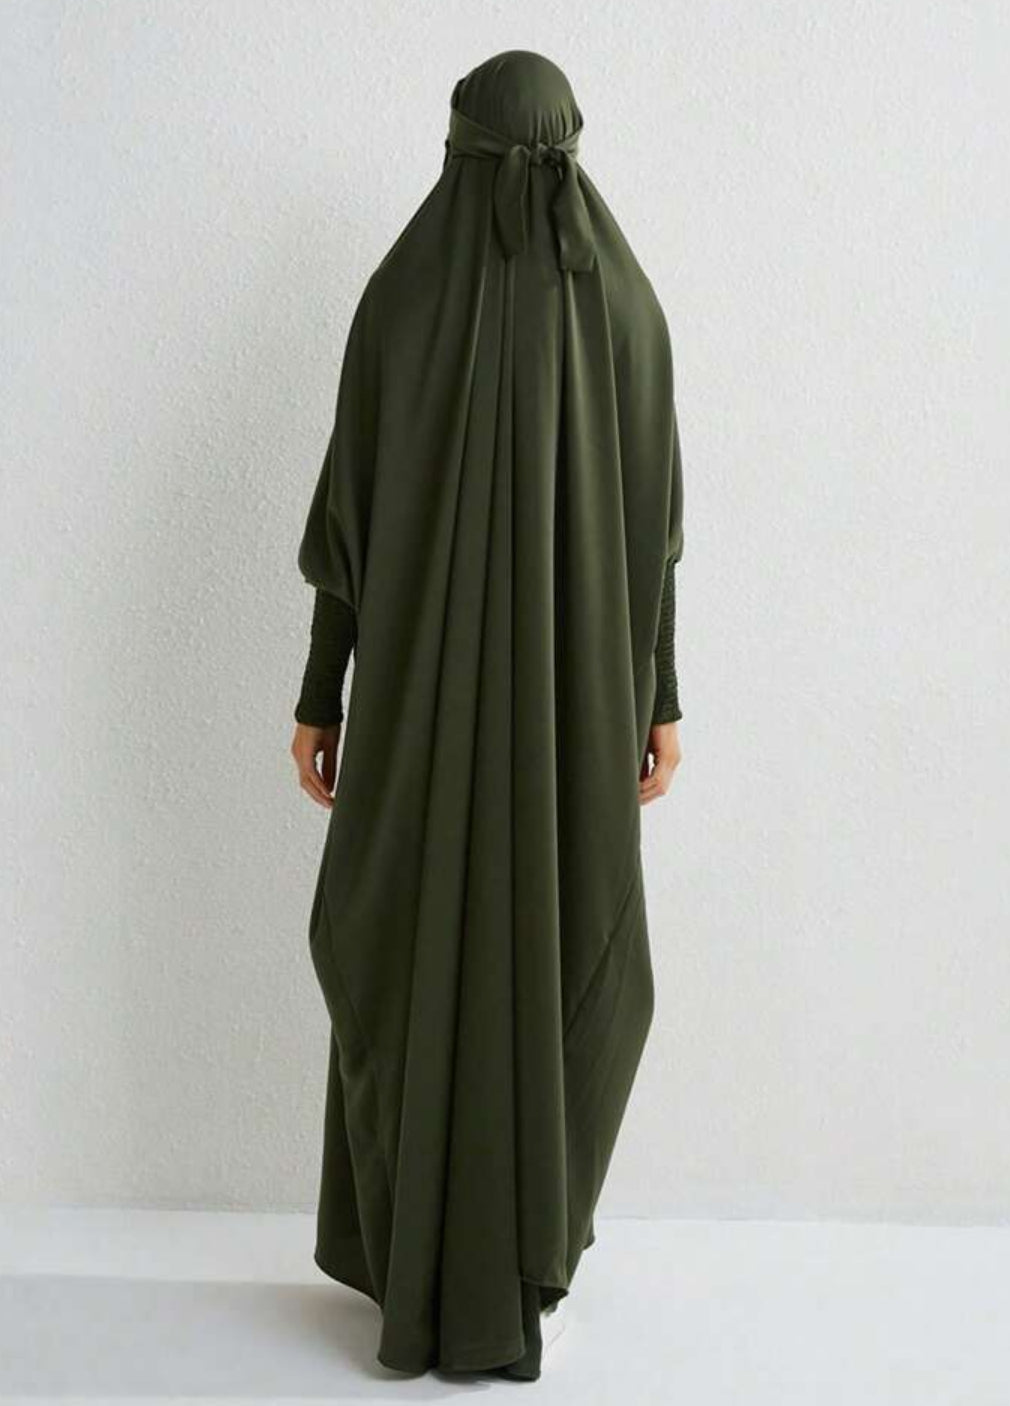 Introducing the epitome of elegance and sophistication - the Satin Jilbab in Olive Green, exclusively available at Hikmah Boutique. Crafted with meticulous attention to detail, this exquisite one-piece tie back satin jilbab is designed to elevate your modest wardrobe to new heights. 